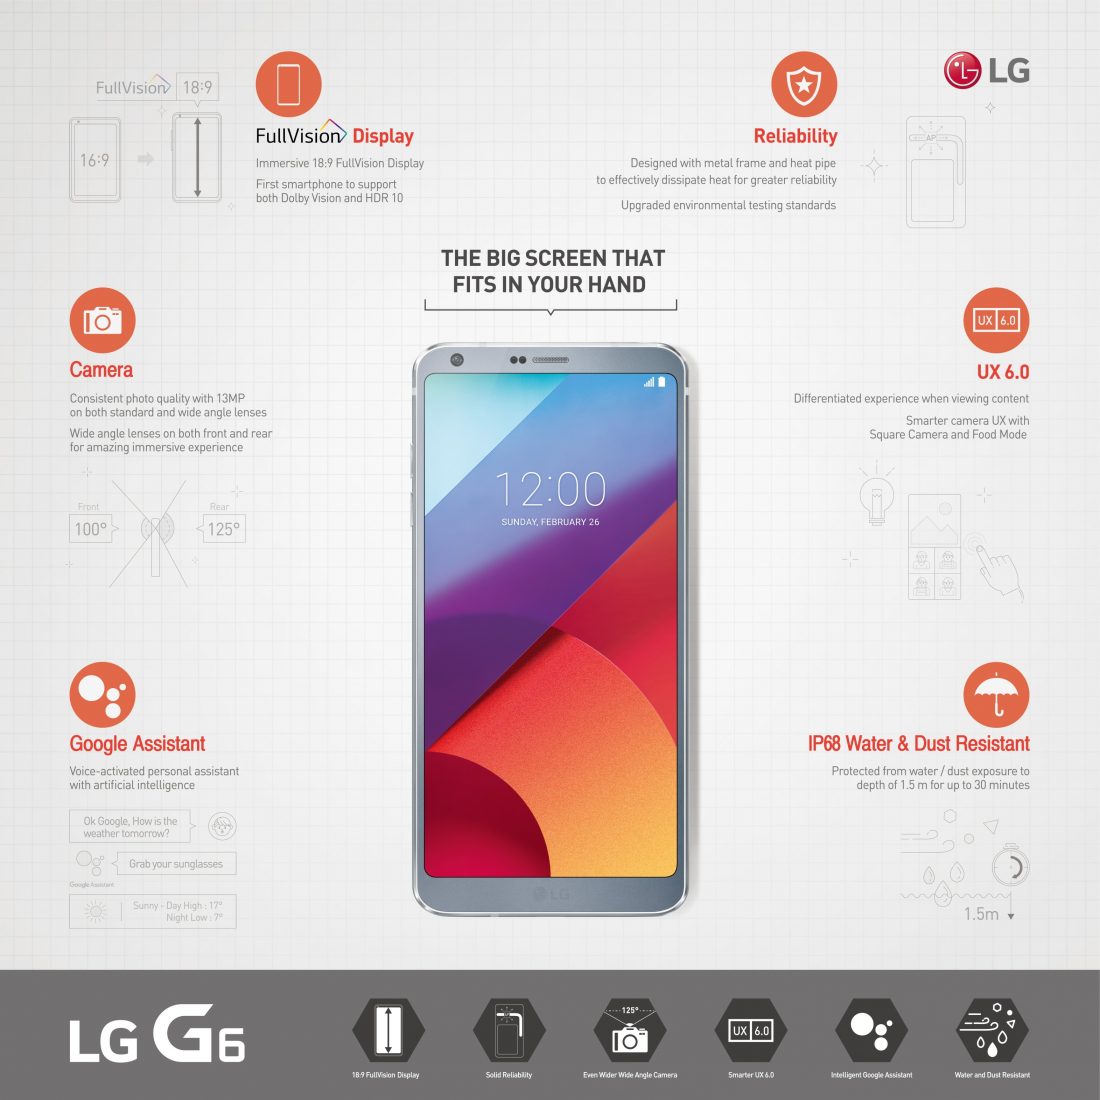 This infographic introduces the unique benefits of LG G6, including its FullVision display, enhanced reliability, Google Assistant AI voice recognition, high-end cameras, UX 6.0 and water and dust resistance.